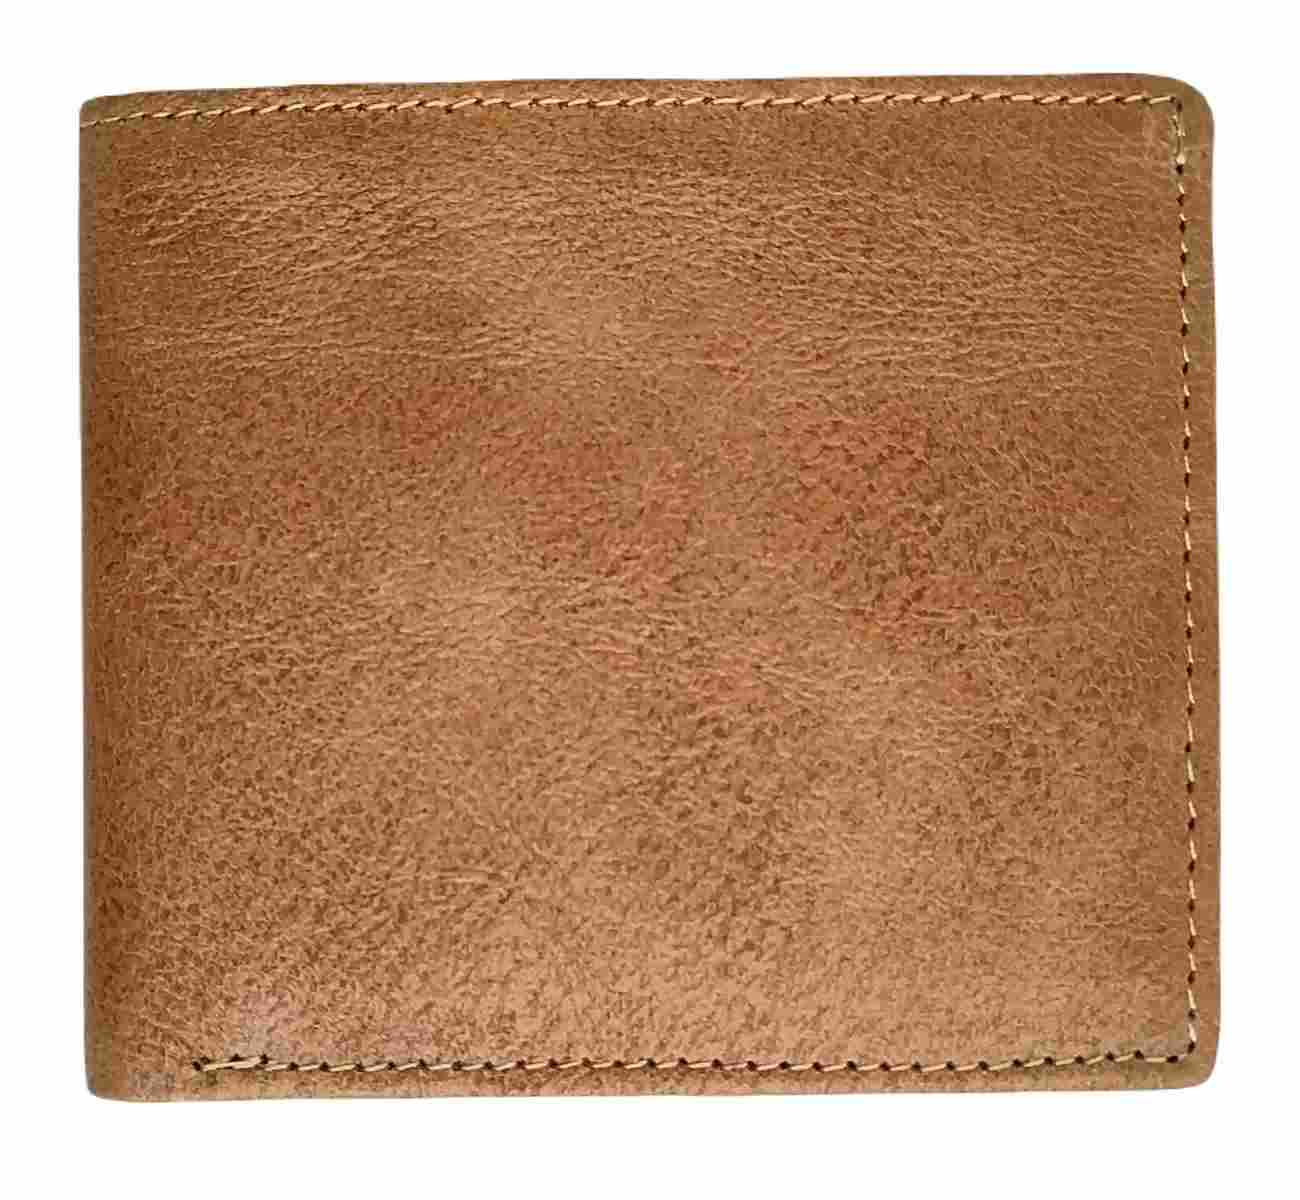 Crust Genuine Leather Wallets for men